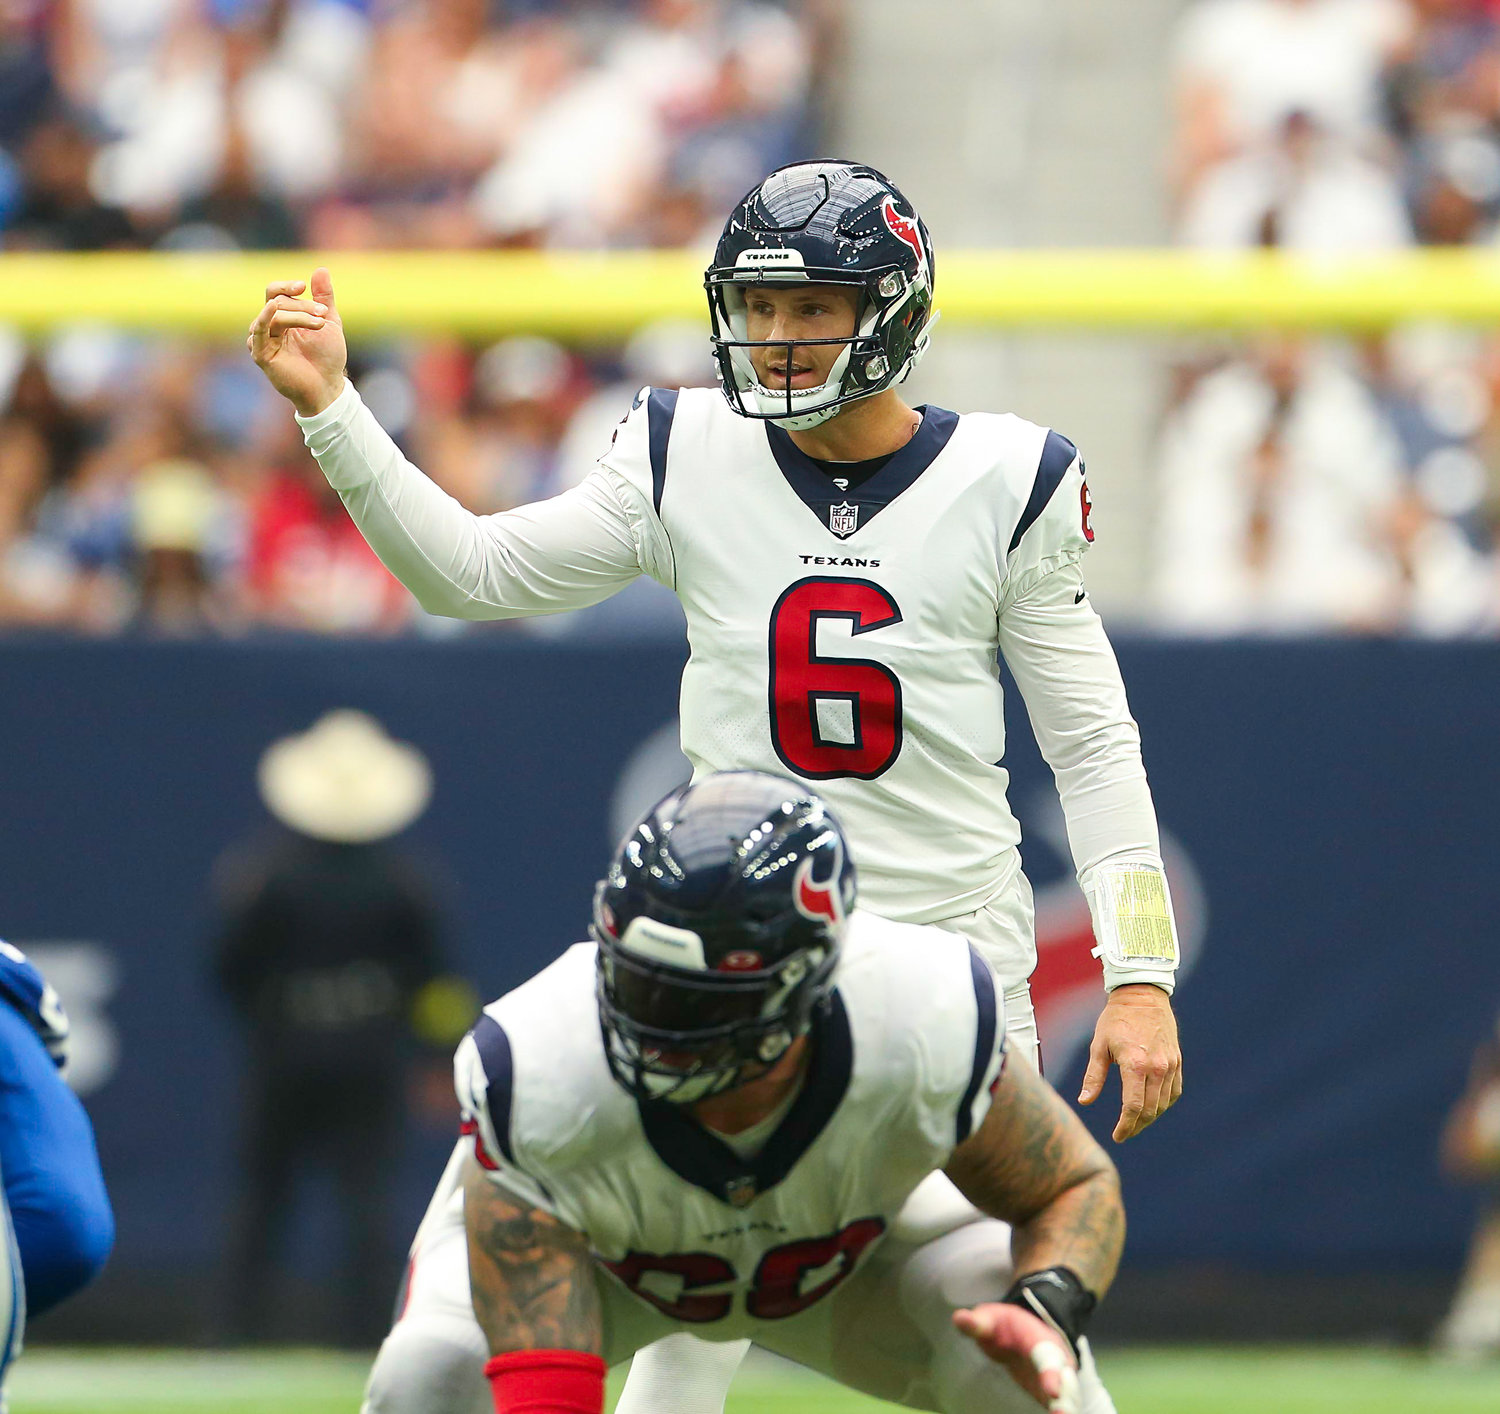 Houston Texans backup quarterback Jeff Driskel in for a snap during an NFL game between the Texans and the Colts on September 11, 2022 in Houston. The game ended in a 20-20 tie after a scoreless overtime period.